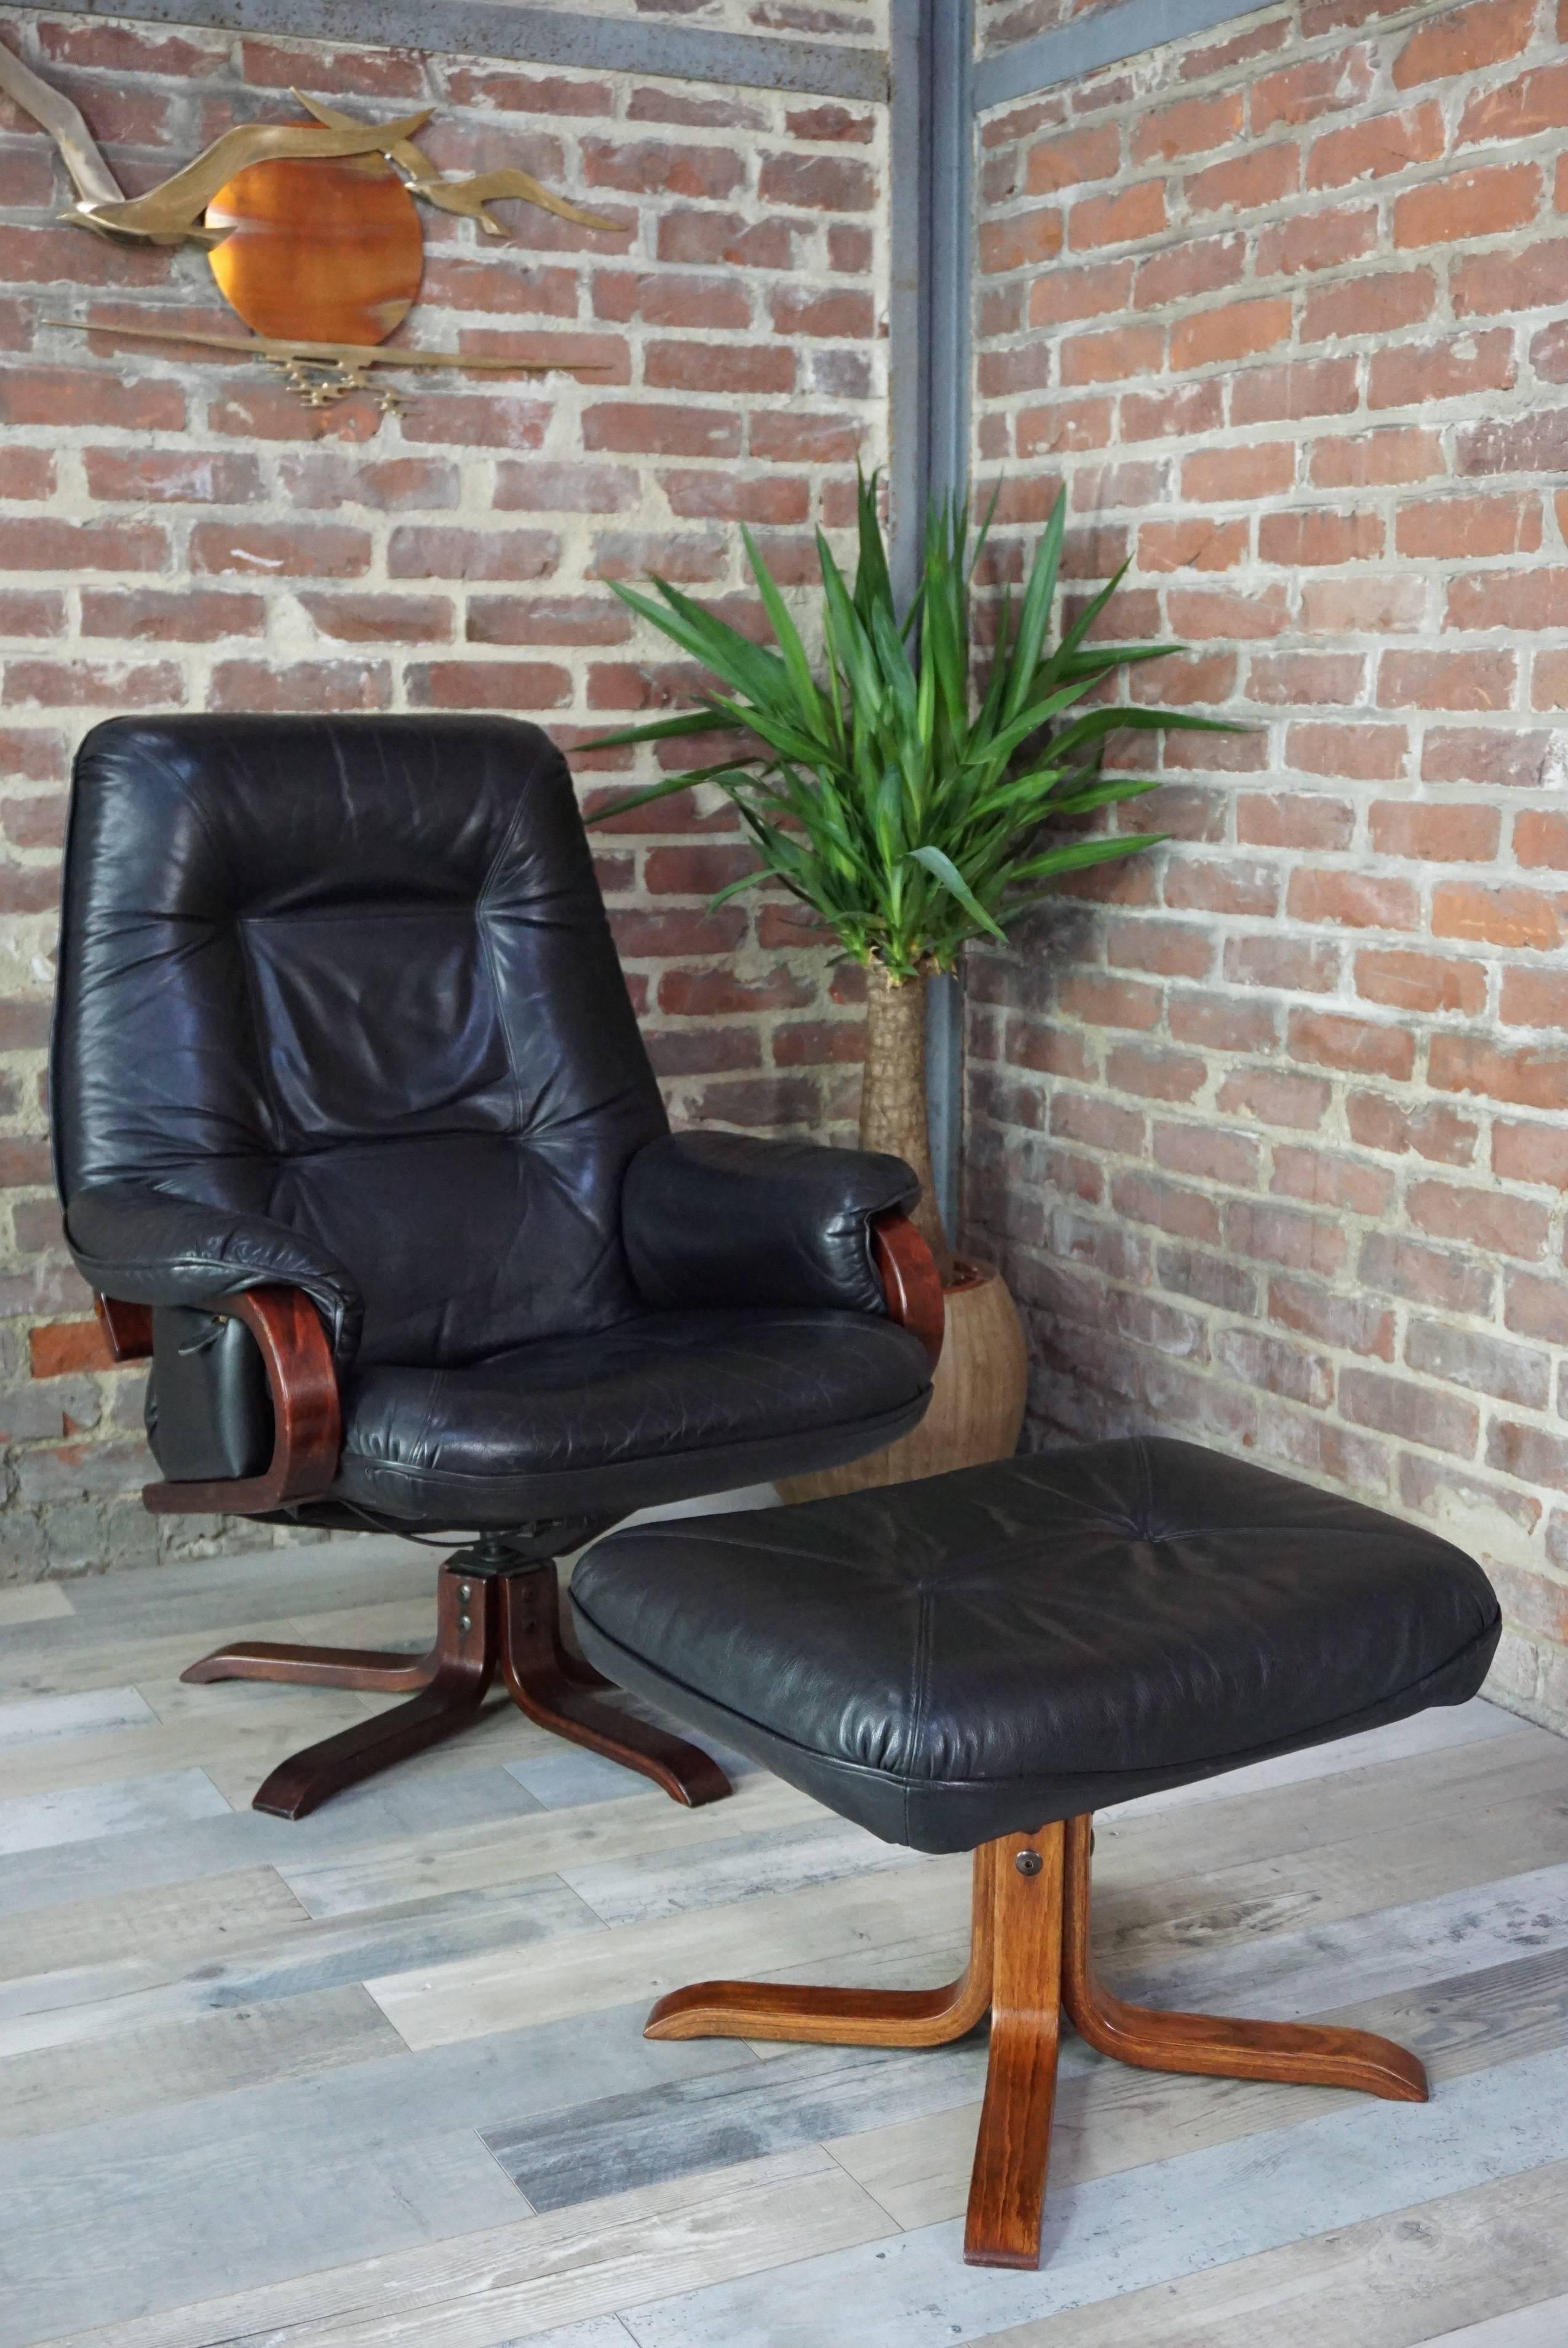 This combination with timeless and Scandinavian design, beautifully crafted is composed of a reclining armchair up to 110 cm deep in relaxed position and its ottoman. Measures: Height 40 cm x length 60 cm x depth 48 cm.
Scandinavian design leather